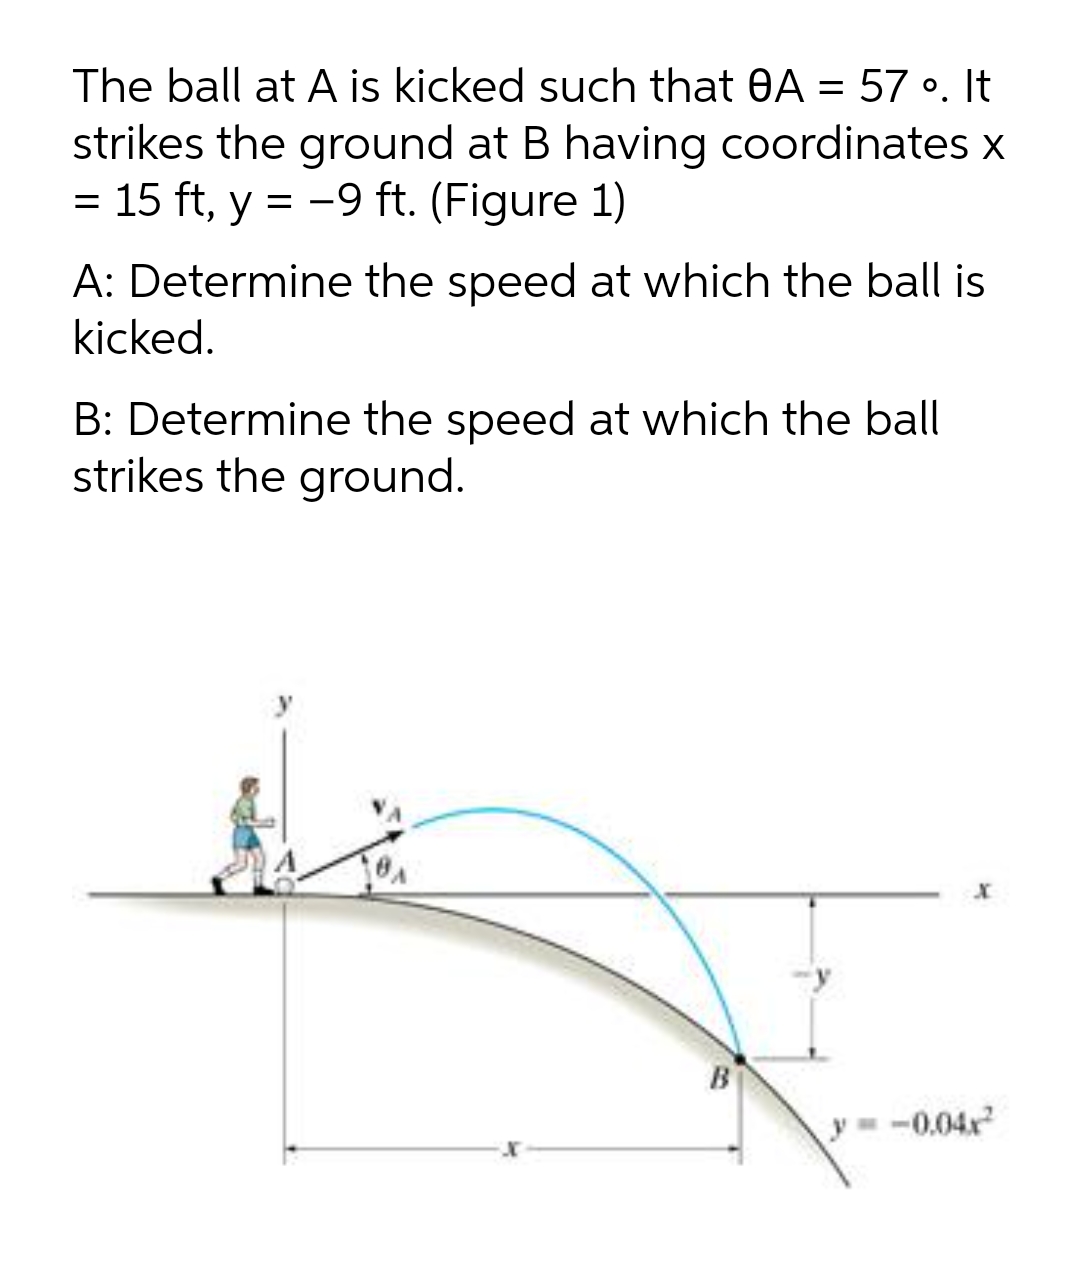 The ball at A is kicked such that 0A = 57 •. It
strikes the ground at B having coordinates x
= 15 ft, y = -9 ft. (Figure 1)
A: Determine the speed at which the ball is
kicked.
B: Determine the speed at which the ball
strikes the ground.
B
y= -0.04x
